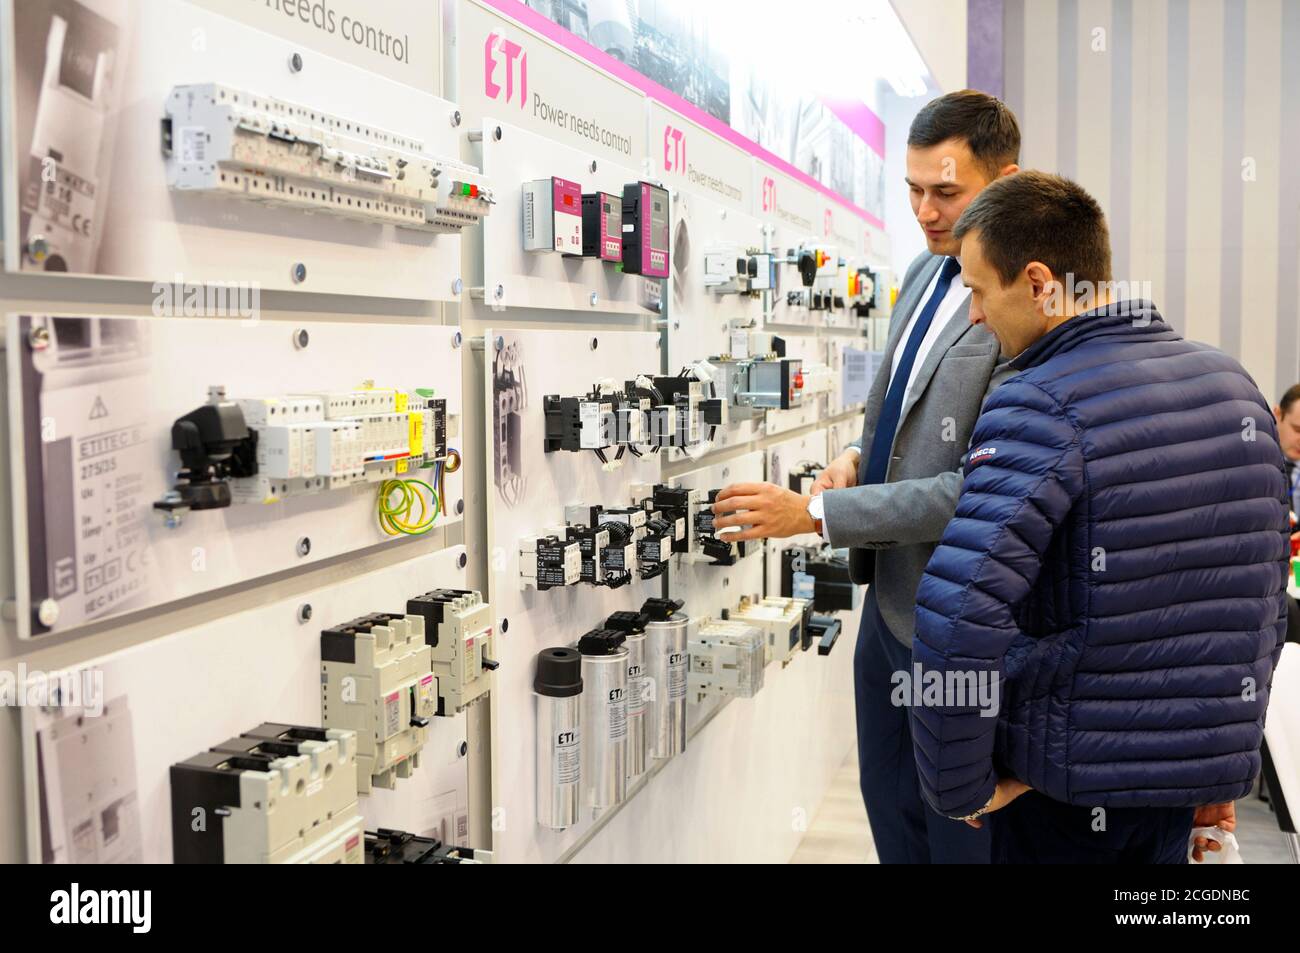 Manager touching the block of the automatic control system of the power supply presented on the stand, explaining to the visitor. Exhibition Industria Stock Photo